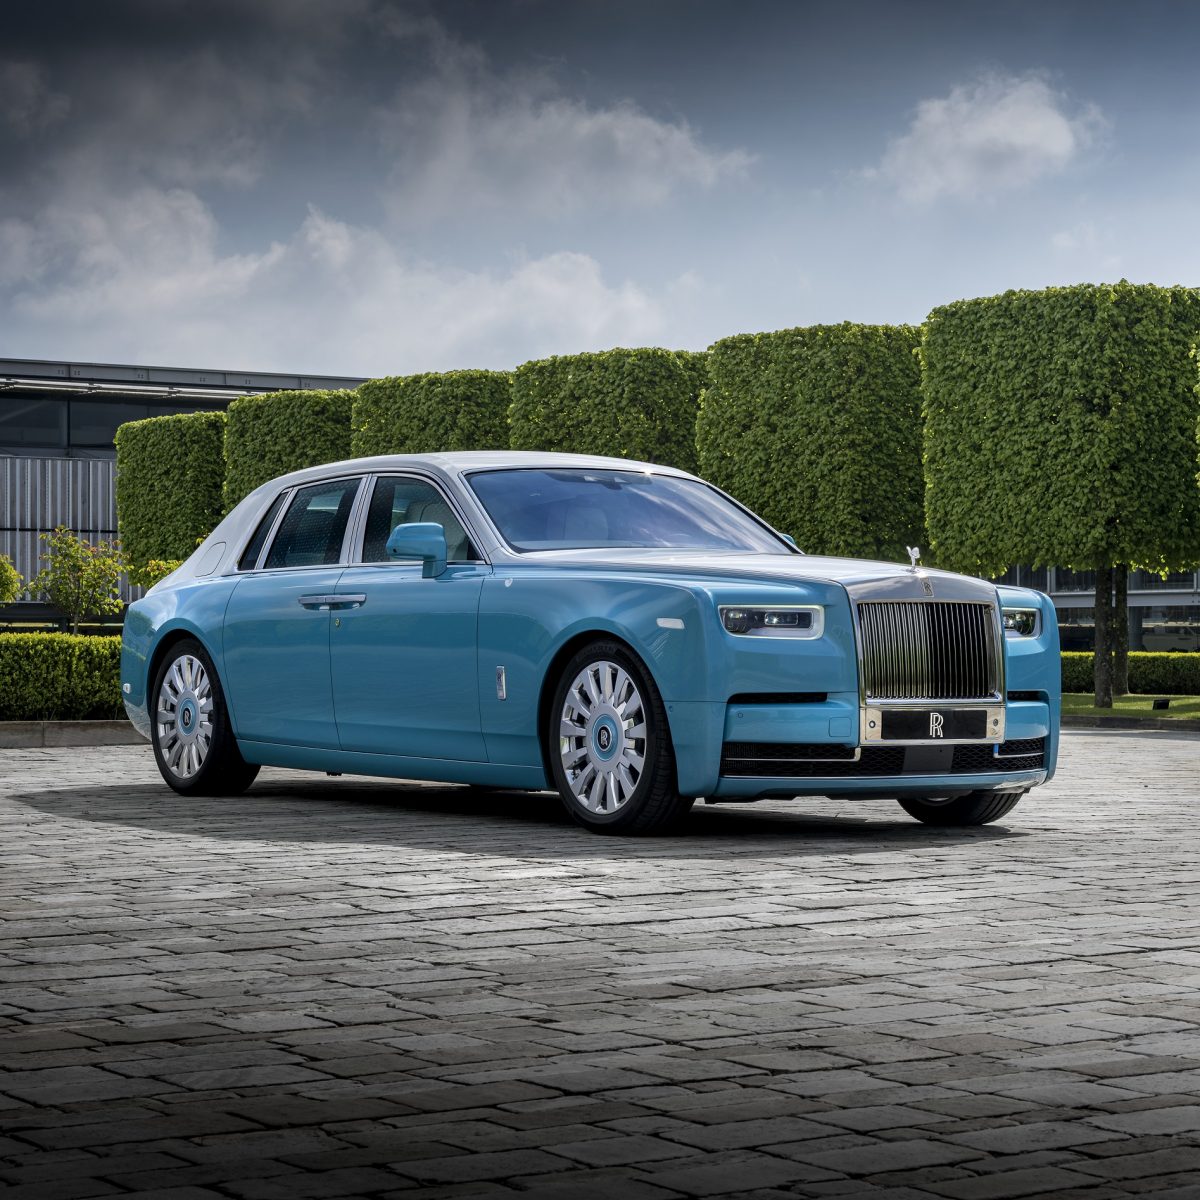 RollsRoyce Motor Cars Dubai Introduces Unique New Editions To Exclusive  Pioneers Collection  Dubai Blog